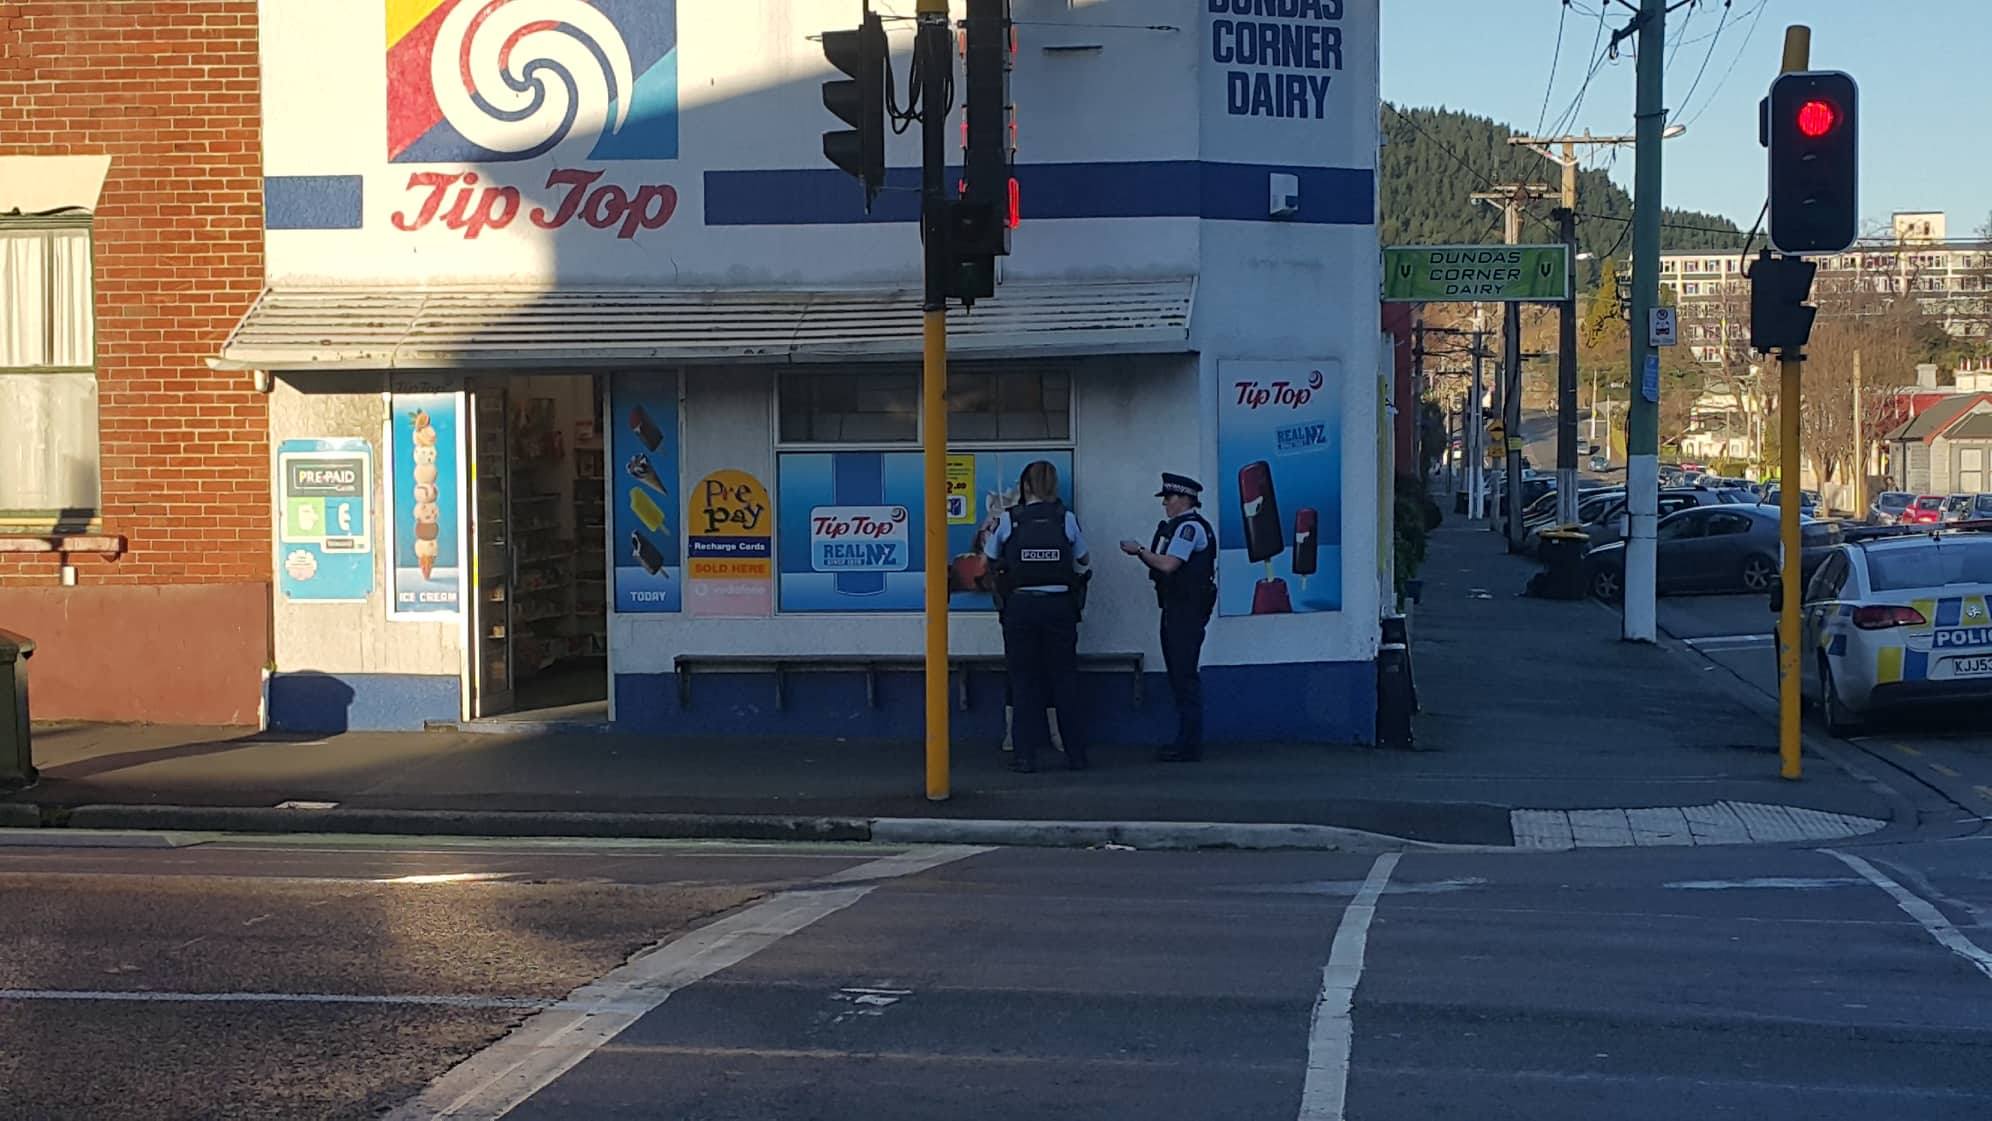 Police outside Dundas Corner Dairy following a suspected robbery. Photo: George Block